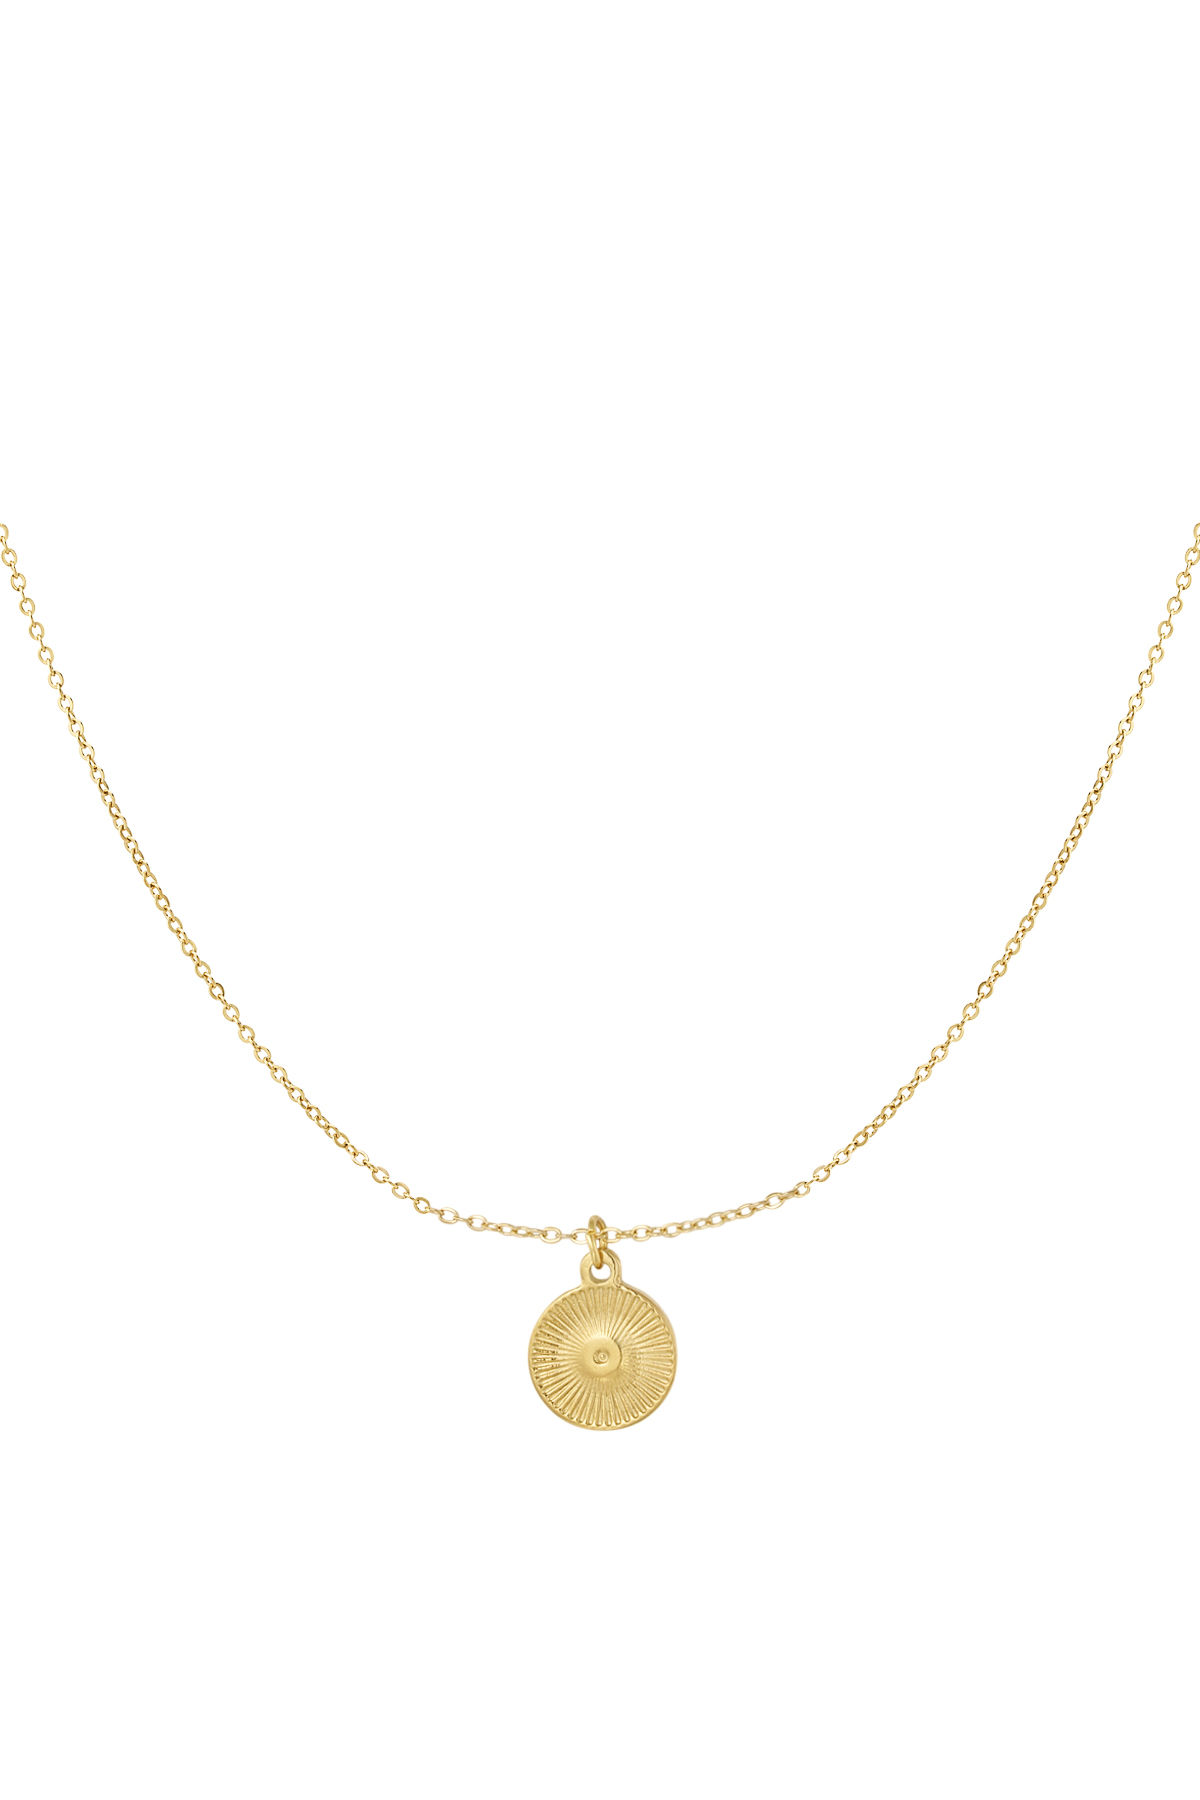 Necklace round coin - gold h5 